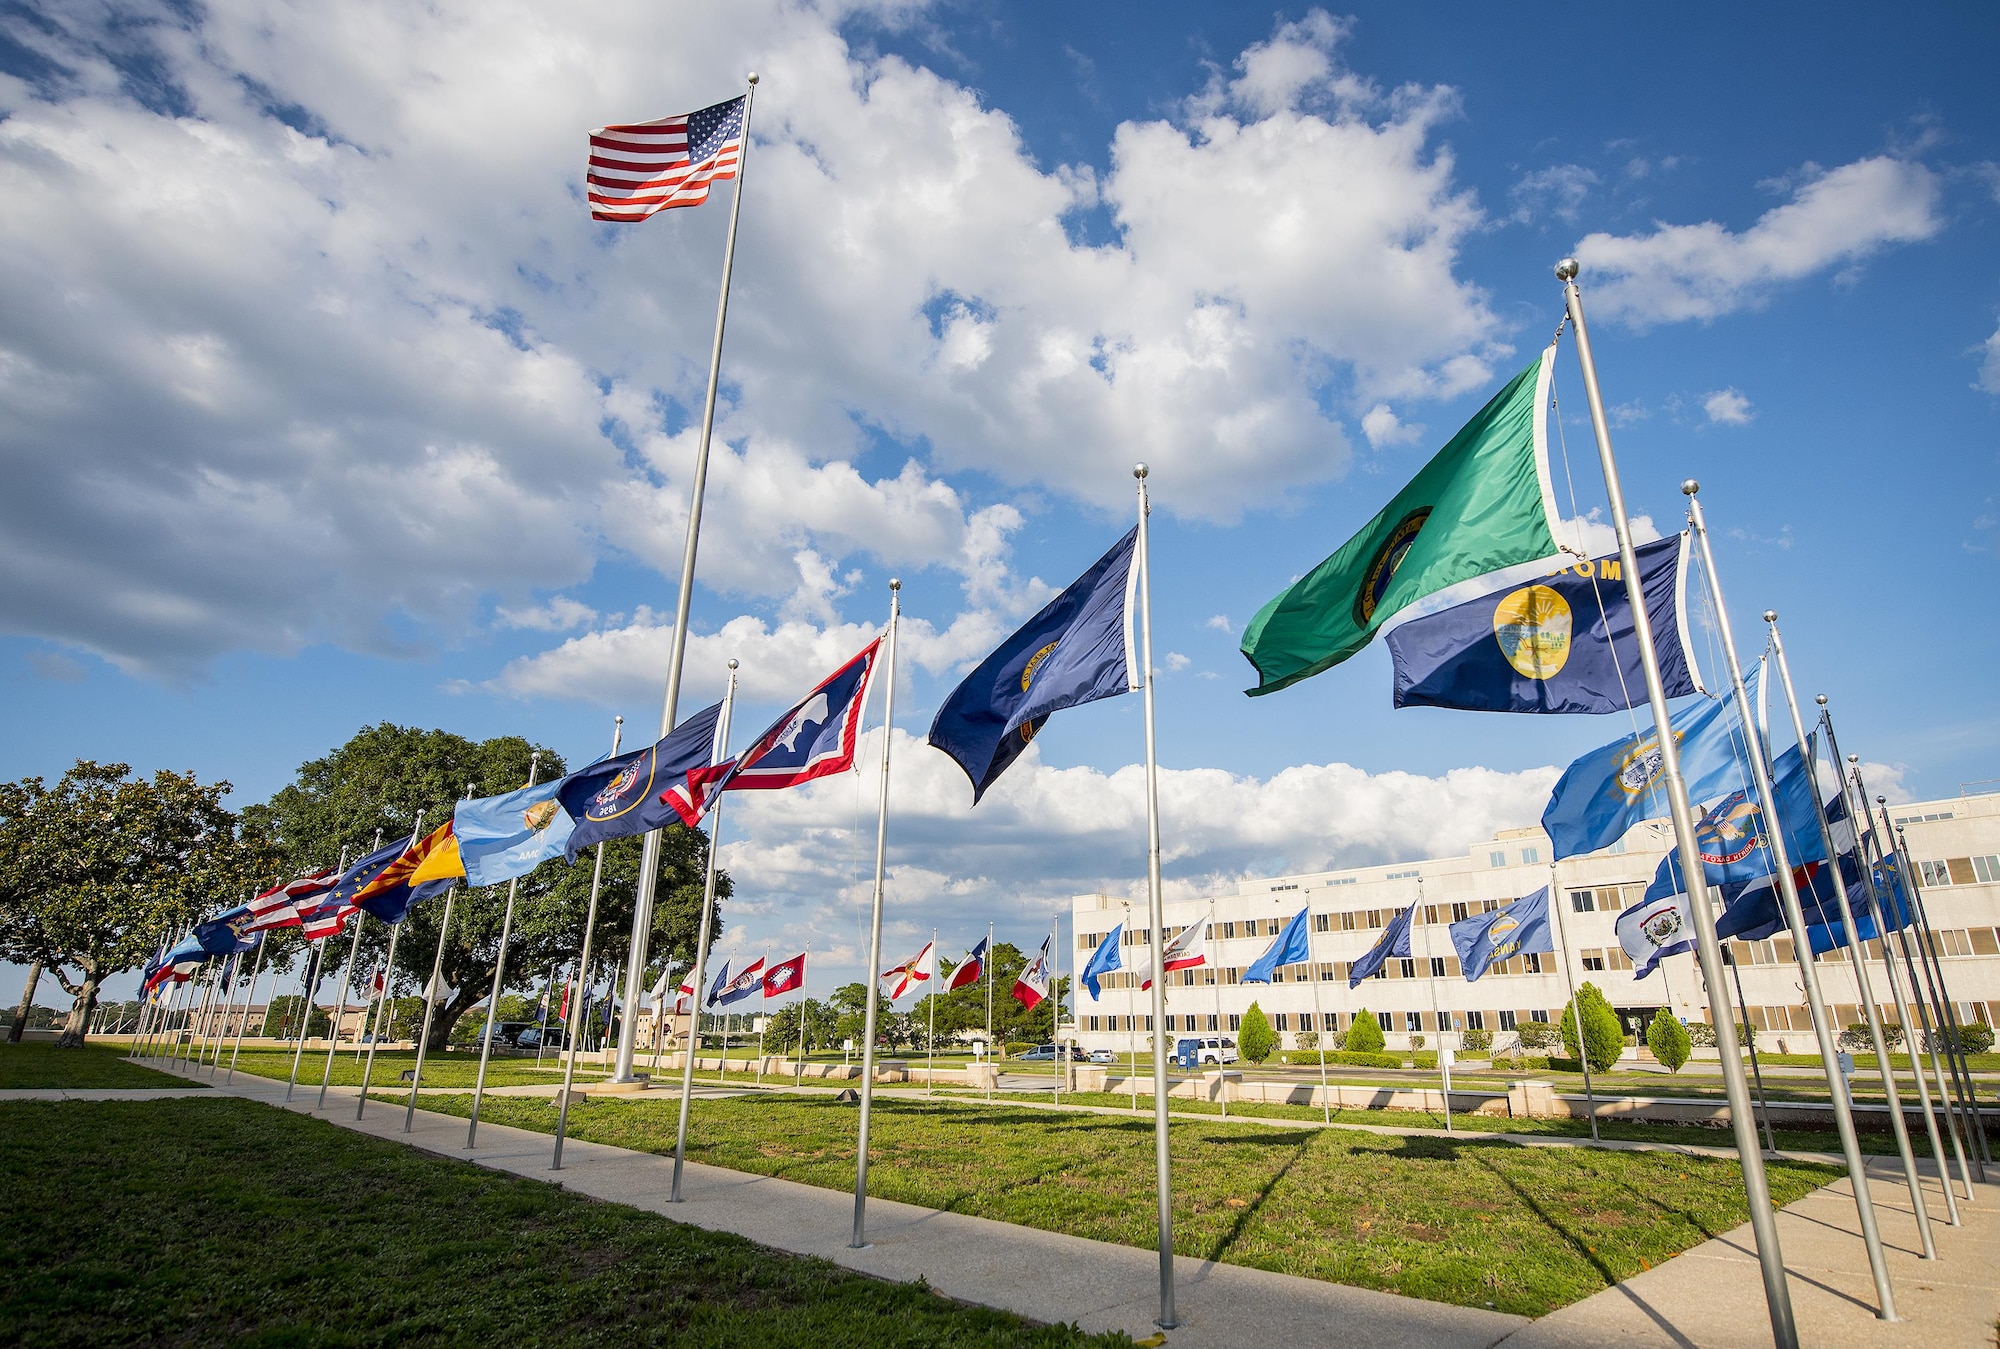 Flags of every state and the American flag flap in the breeze in front of the 96th Test Wing headquarters building.  Flag Day is celebrated in America on June 14.  National Flag Day began in 1949 and commemorates the adoption of the U.S. Flag on June 14, 1777. (U.S. Air Force photo/Samuel King Jr.)